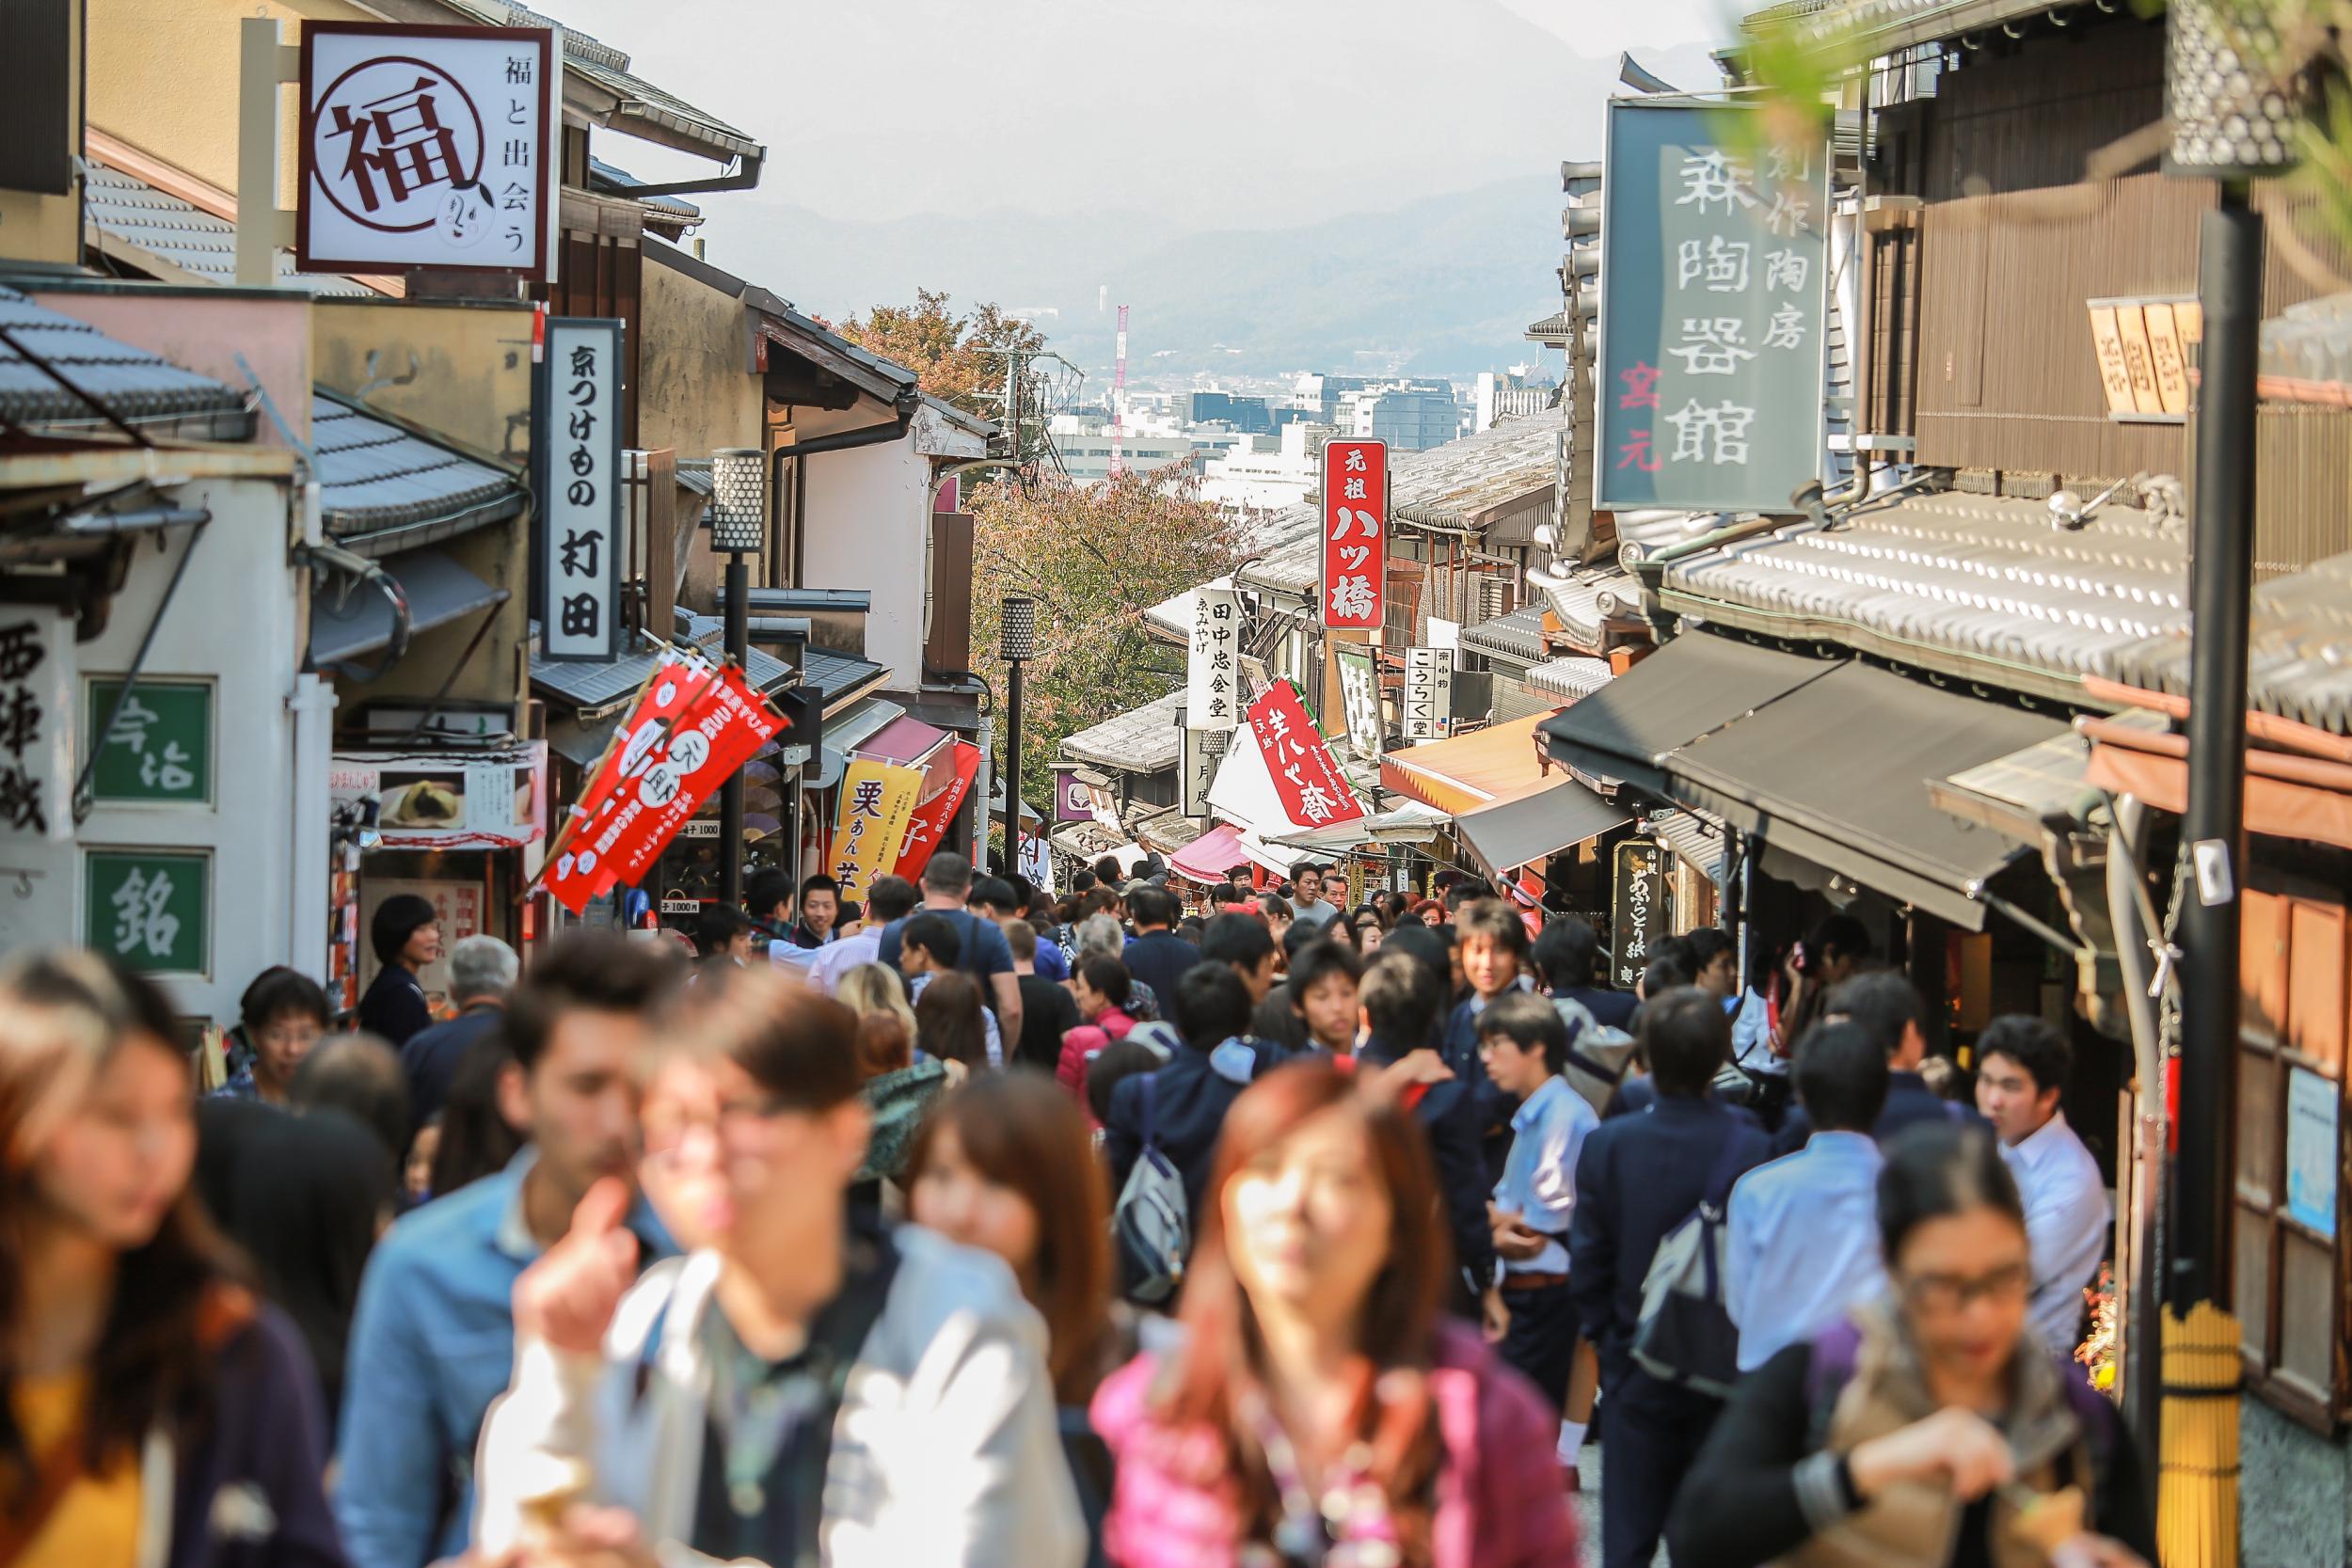 Kyoto is struggling with the effects of overtourism